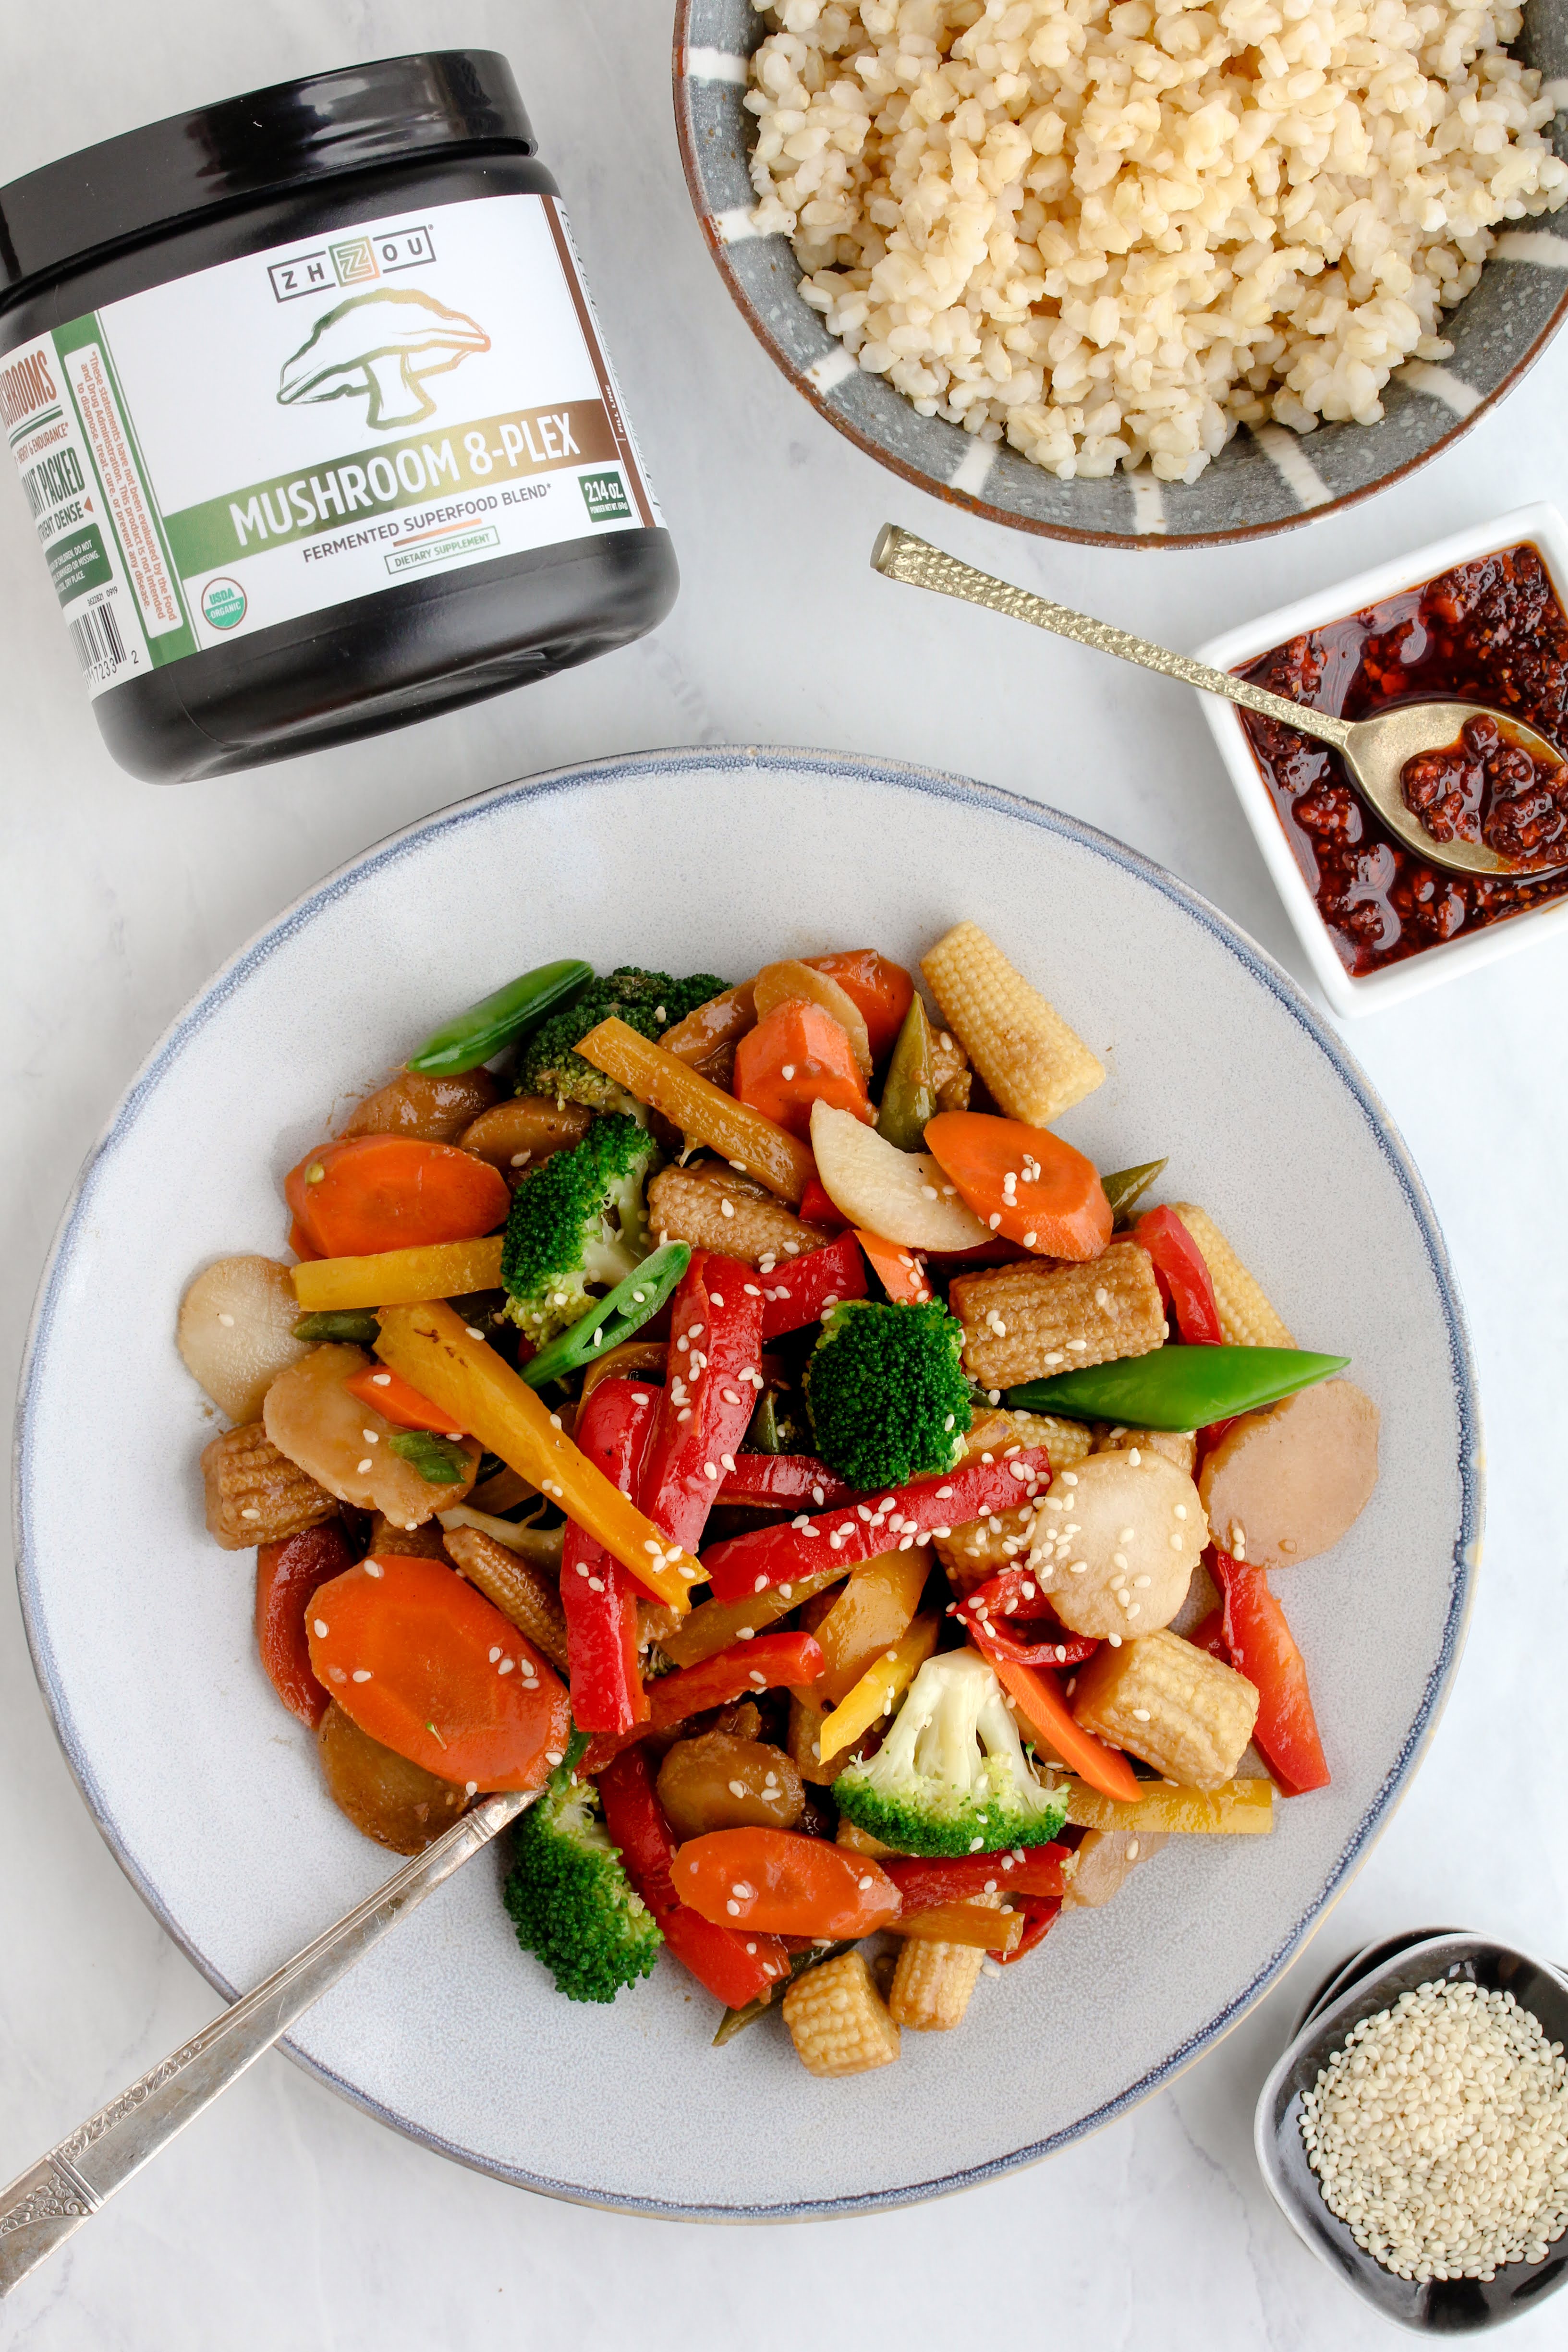 8-plex superfood blend placed next to a brightly colored bowl of stir fry vegetables